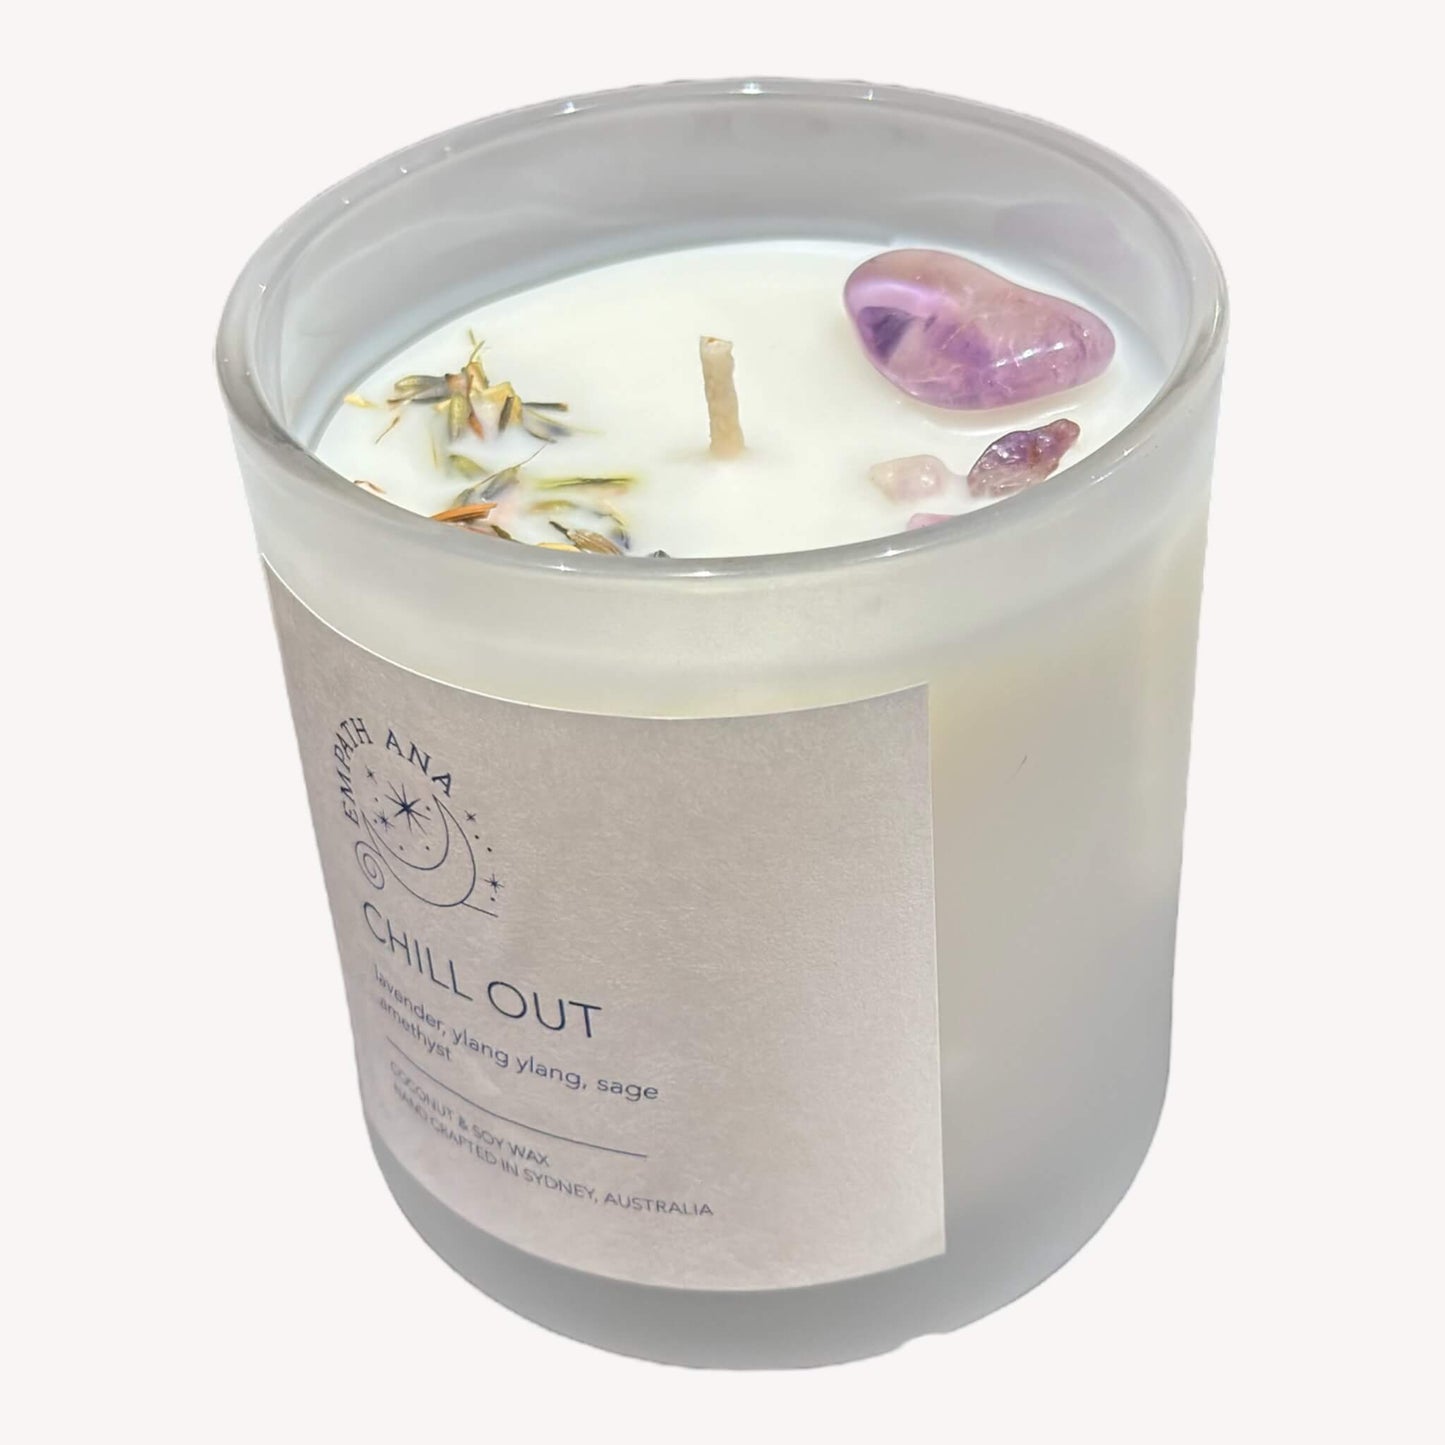 Top view of Empath Ana's Chill Out Crystal Candle in the Medium size (200 mls). Amethyst crystals and a blend of Sage, Sea Salt, Lavender, and Ylang Ylang fragrance create a harmonious display, enhancing the relaxation experience.